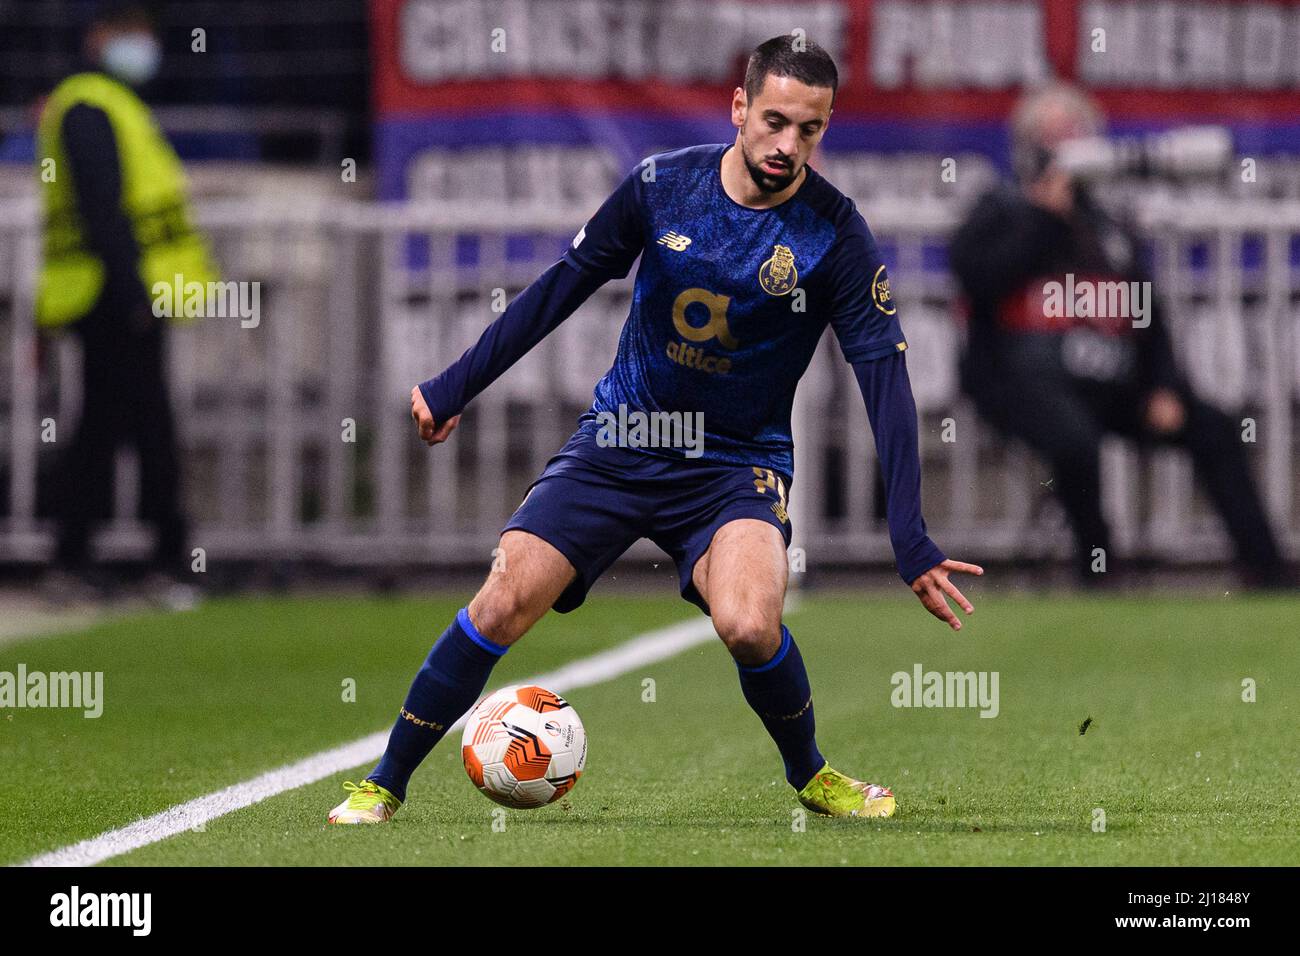 Lyon, France - March 17: Bruno Costa of FC Porto controls the ball during the UEFA Europa League Round of 16 Leg Two match between Olympique Lyon and Stock Photo